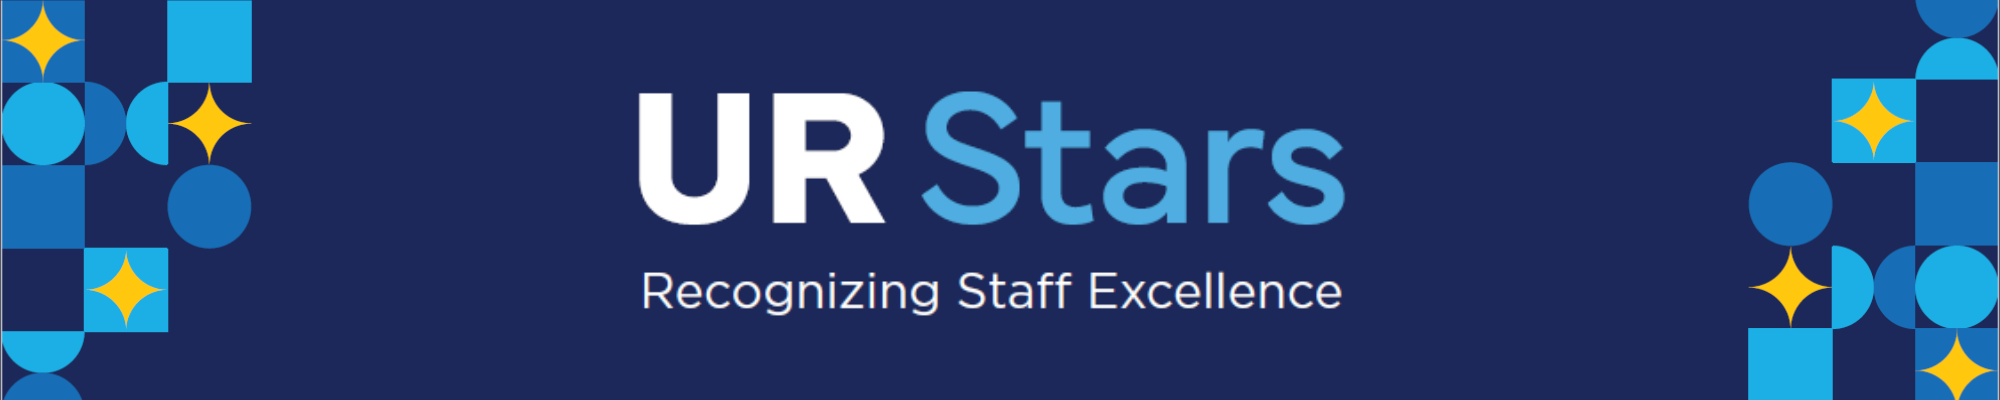 UR Stars: Recognizing Staff Excellence